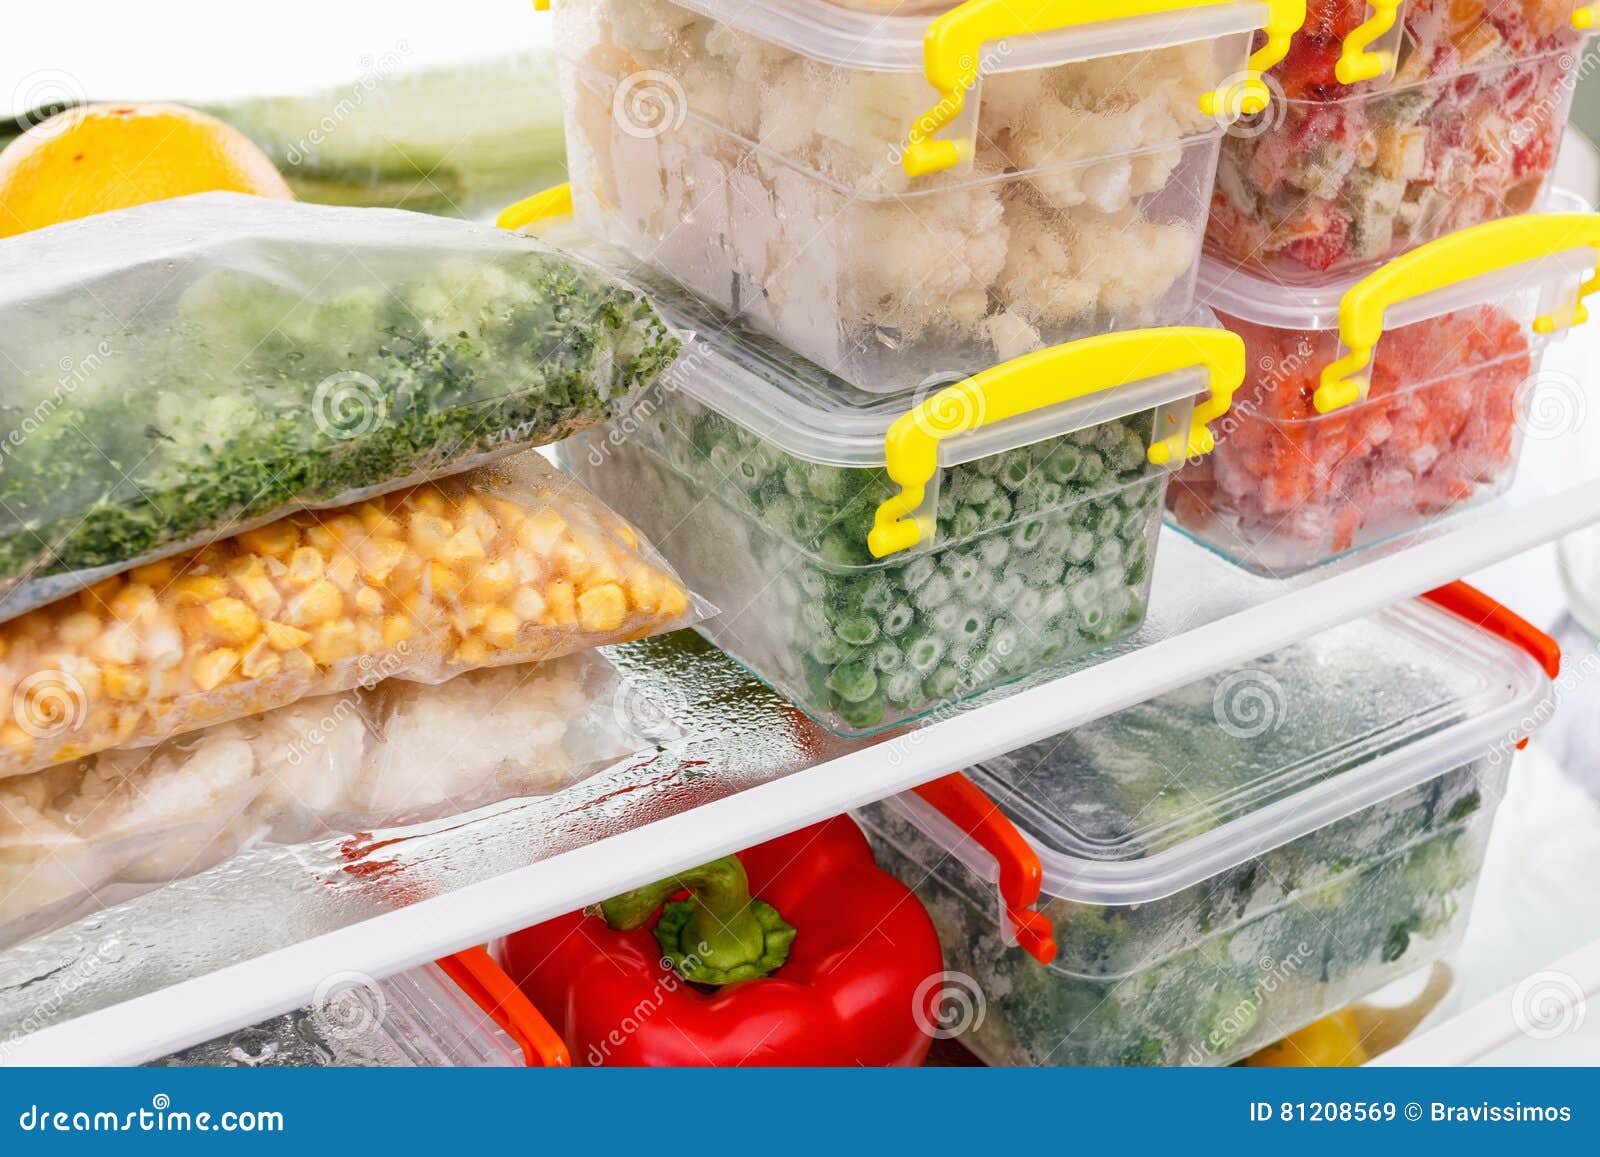 frozen food in the refrigerator. vegetables on the freezer shelves.